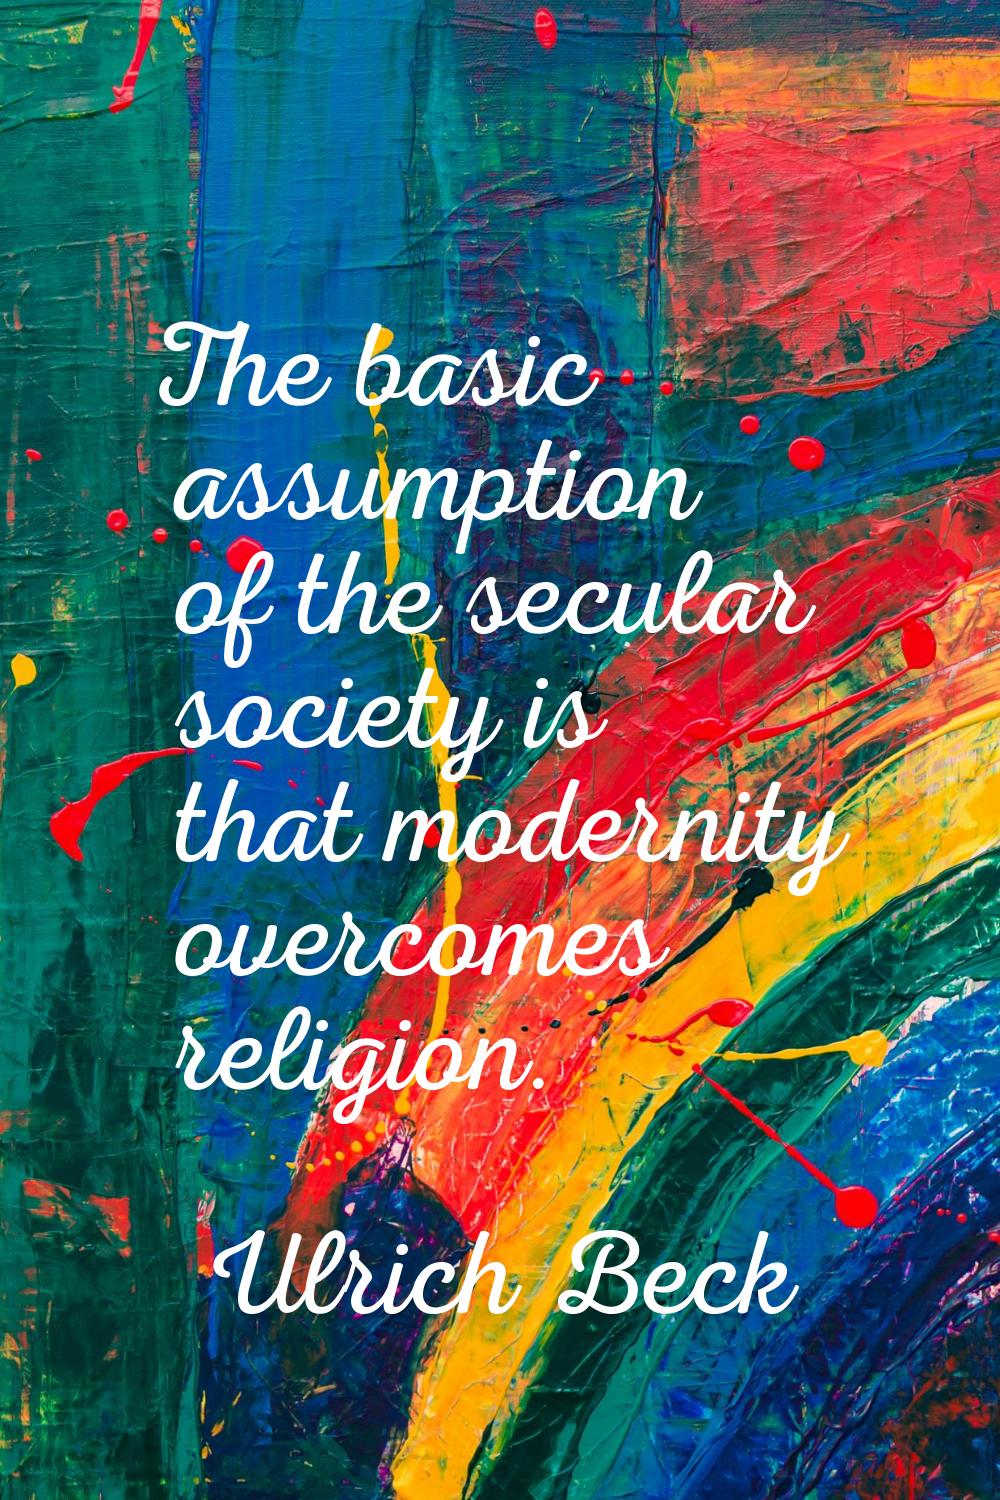 The basic assumption of the secular society is that modernity overcomes religion.